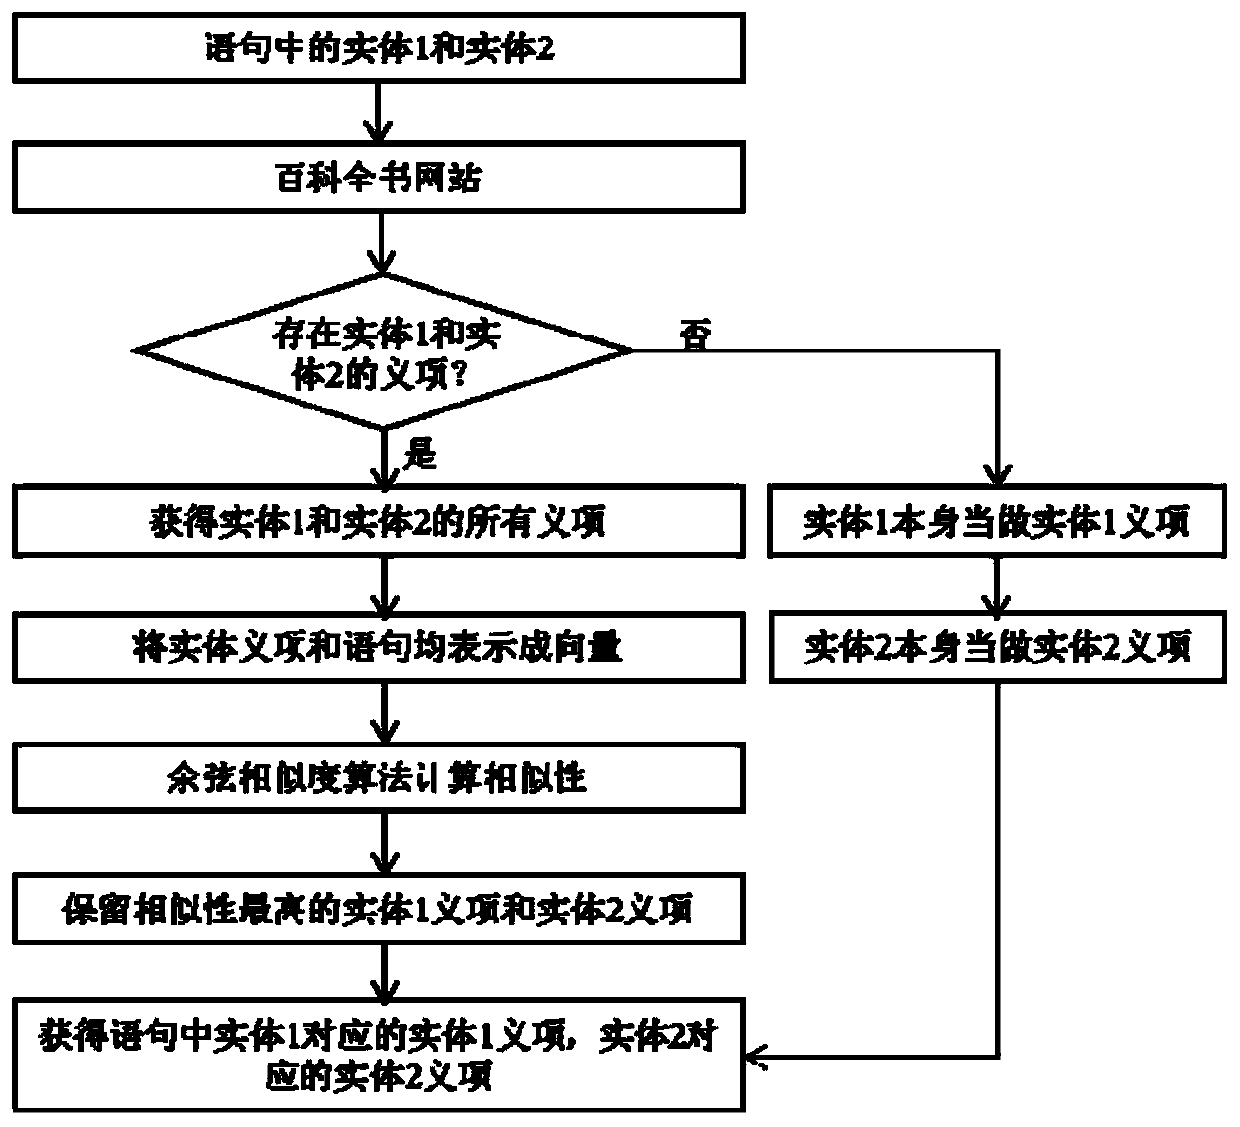 Chinese entity relationship extraction method based on character and word feature fusion of entity meaning items